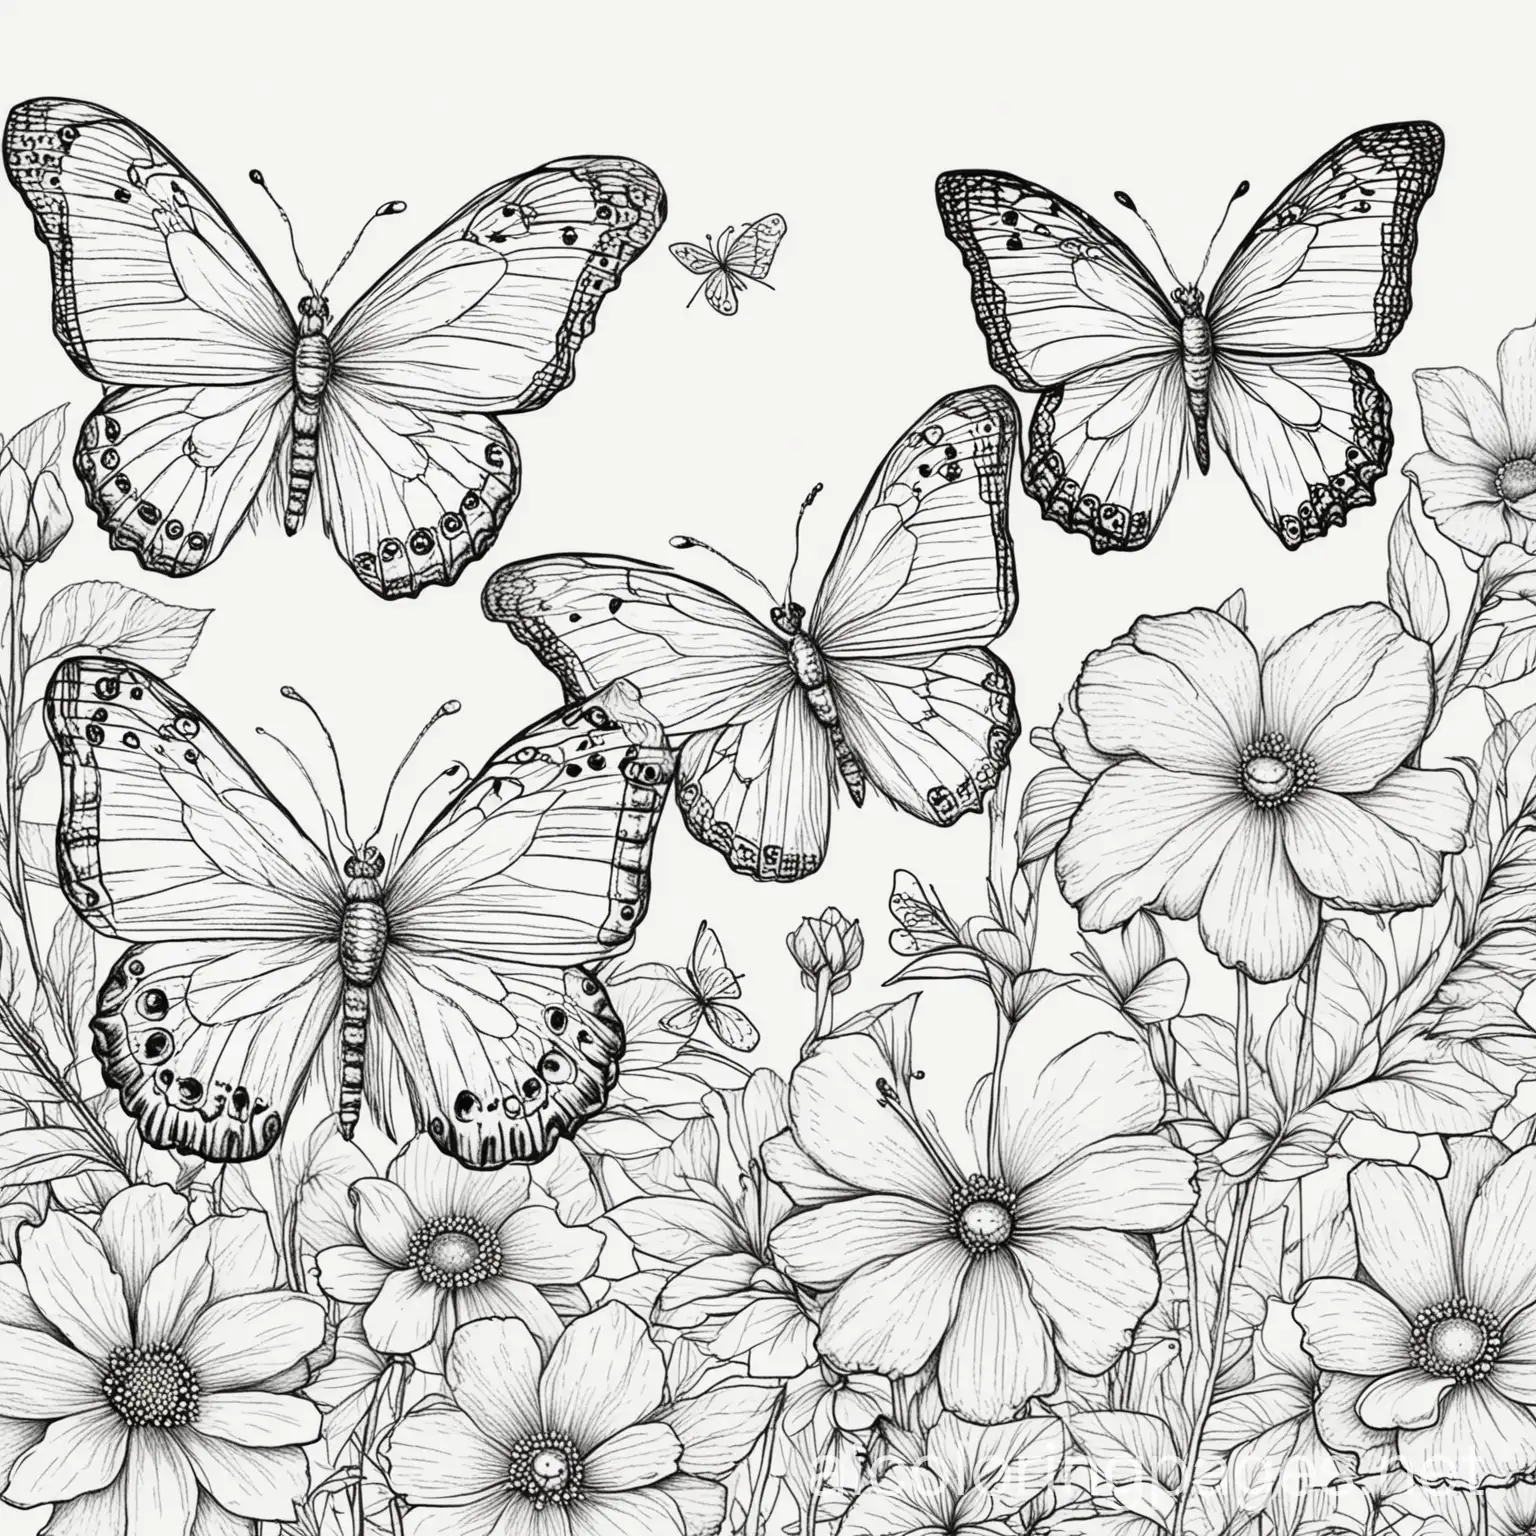 butterflies with flower background, Coloring Page, black and white, line art, white background, Simplicity, Ample White Space. The background of the coloring page is plain white to make it easy for young children to color within the lines. The outlines of all the subjects are easy to distinguish, making it simple for kids to color without too much difficulty